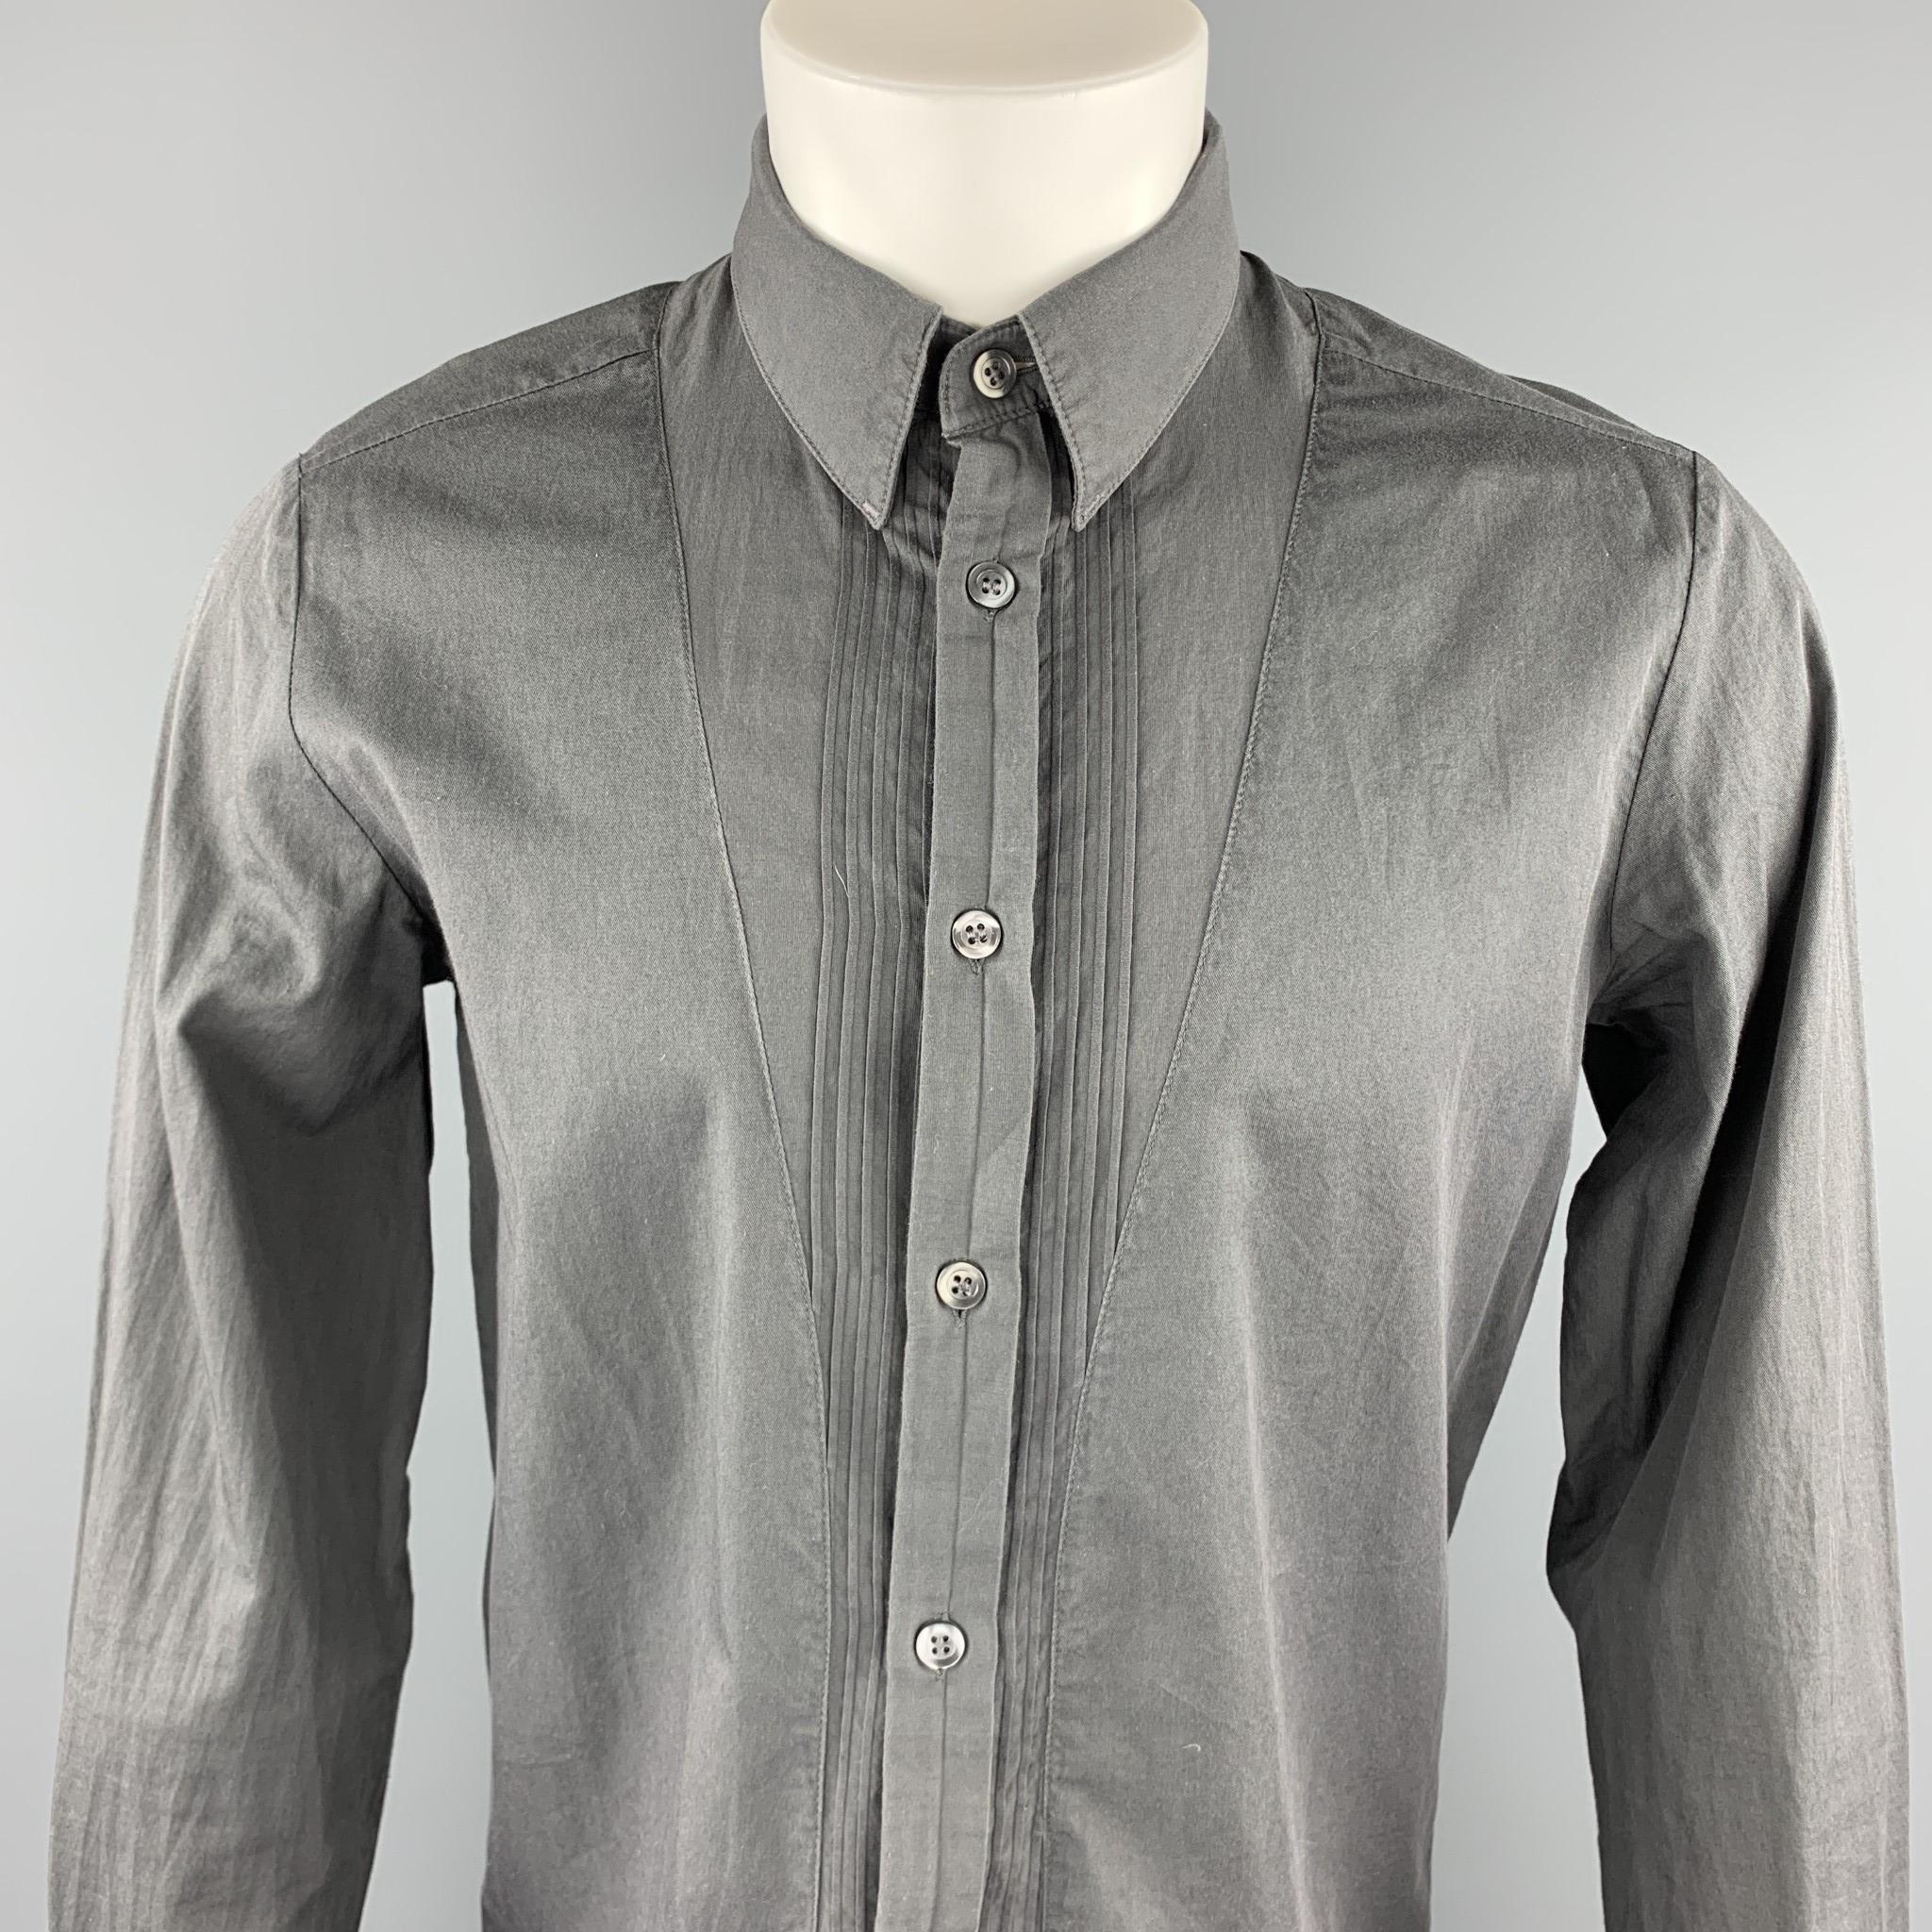 STEPHAN SCHNEIDER long sleeve shirt comes in a dark gray cotton with a front pleat featuring a button up style and a pointed collar. Made in Belgium.

Excellent Pre-Owned Condition.
Marked: 5

Measurements:

Shoulder: 17.5 in. 
Chest: 41 in.